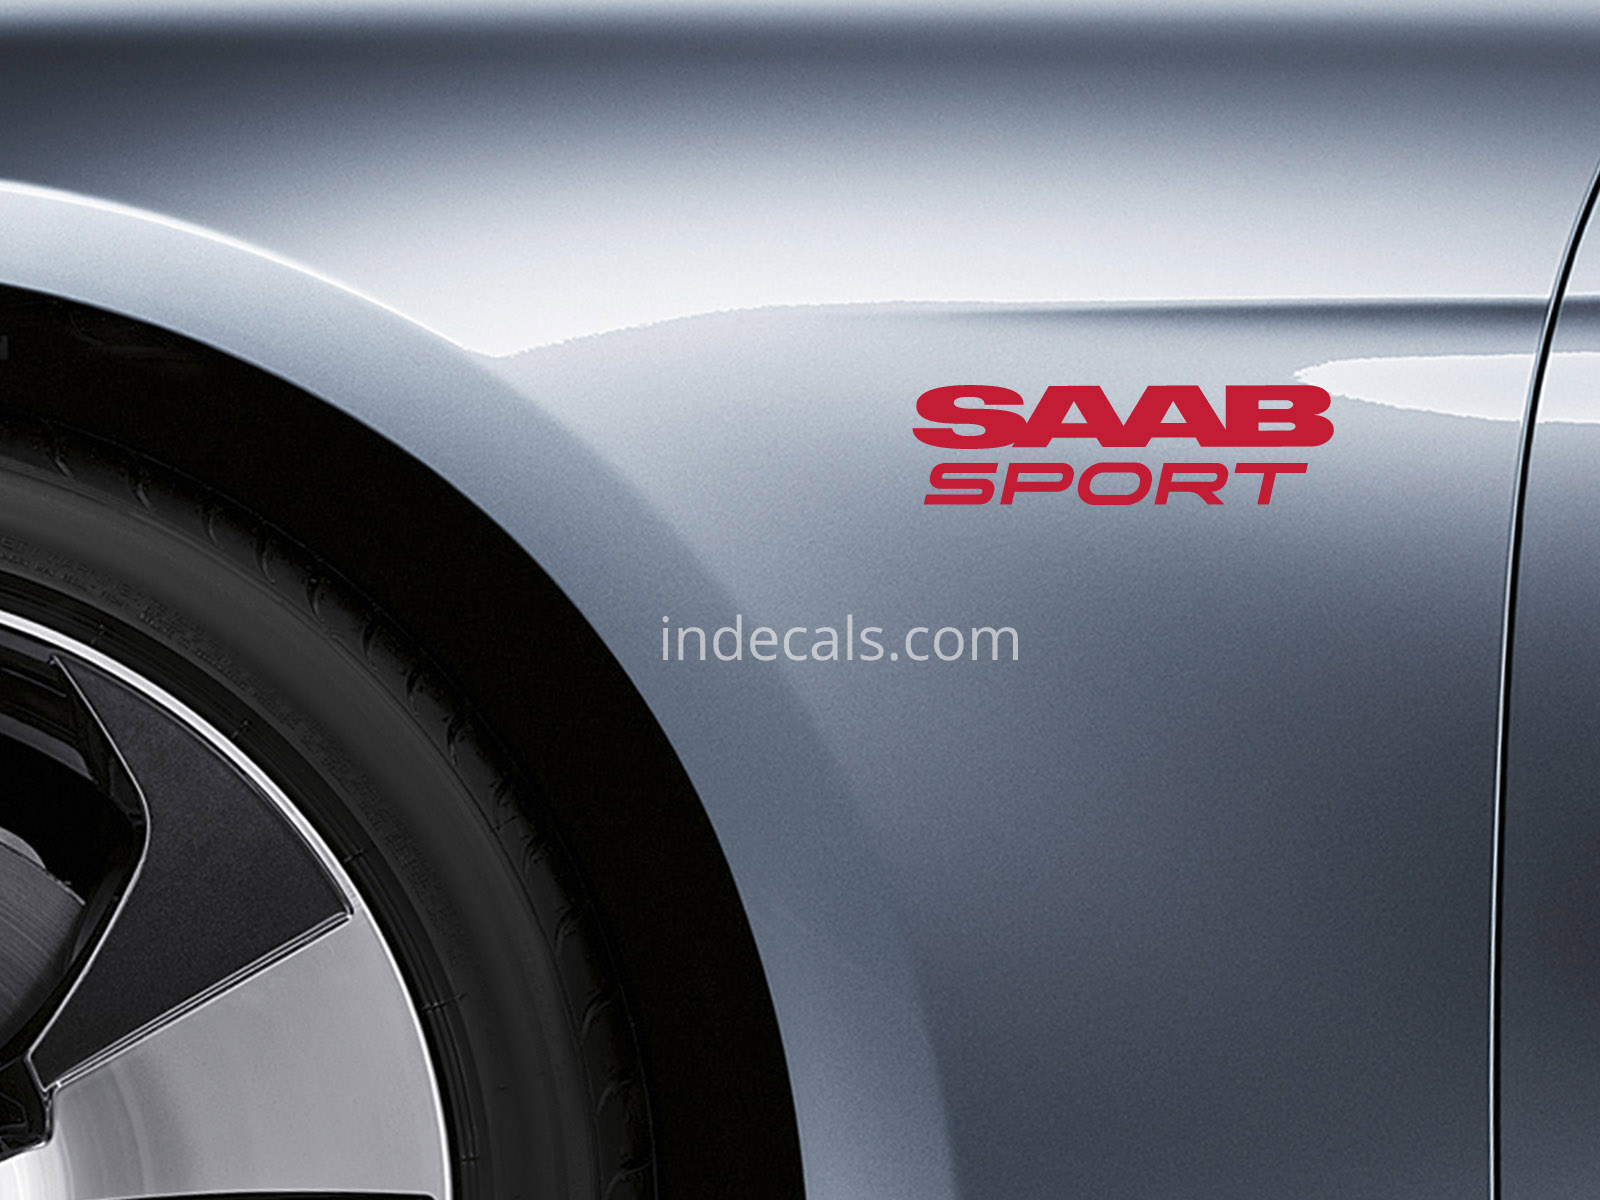 2 x Saab Sports stickers for Wings - Red